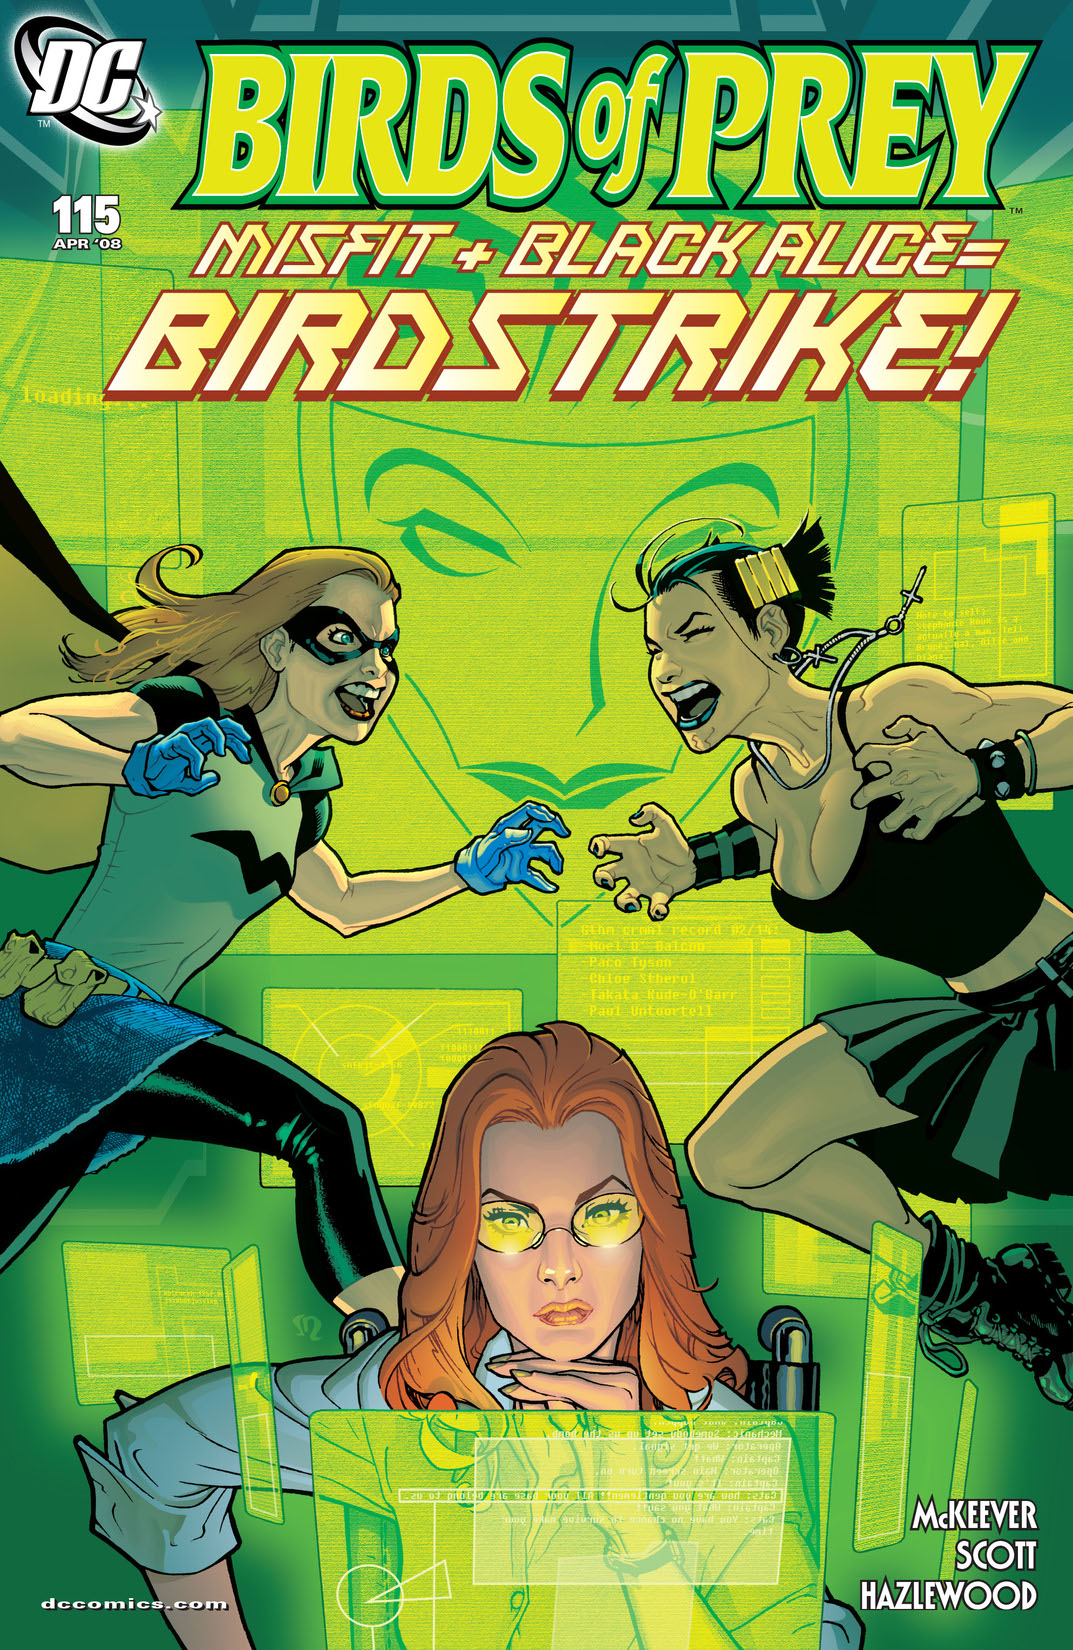 Birds of Prey (1998-) #115 preview images